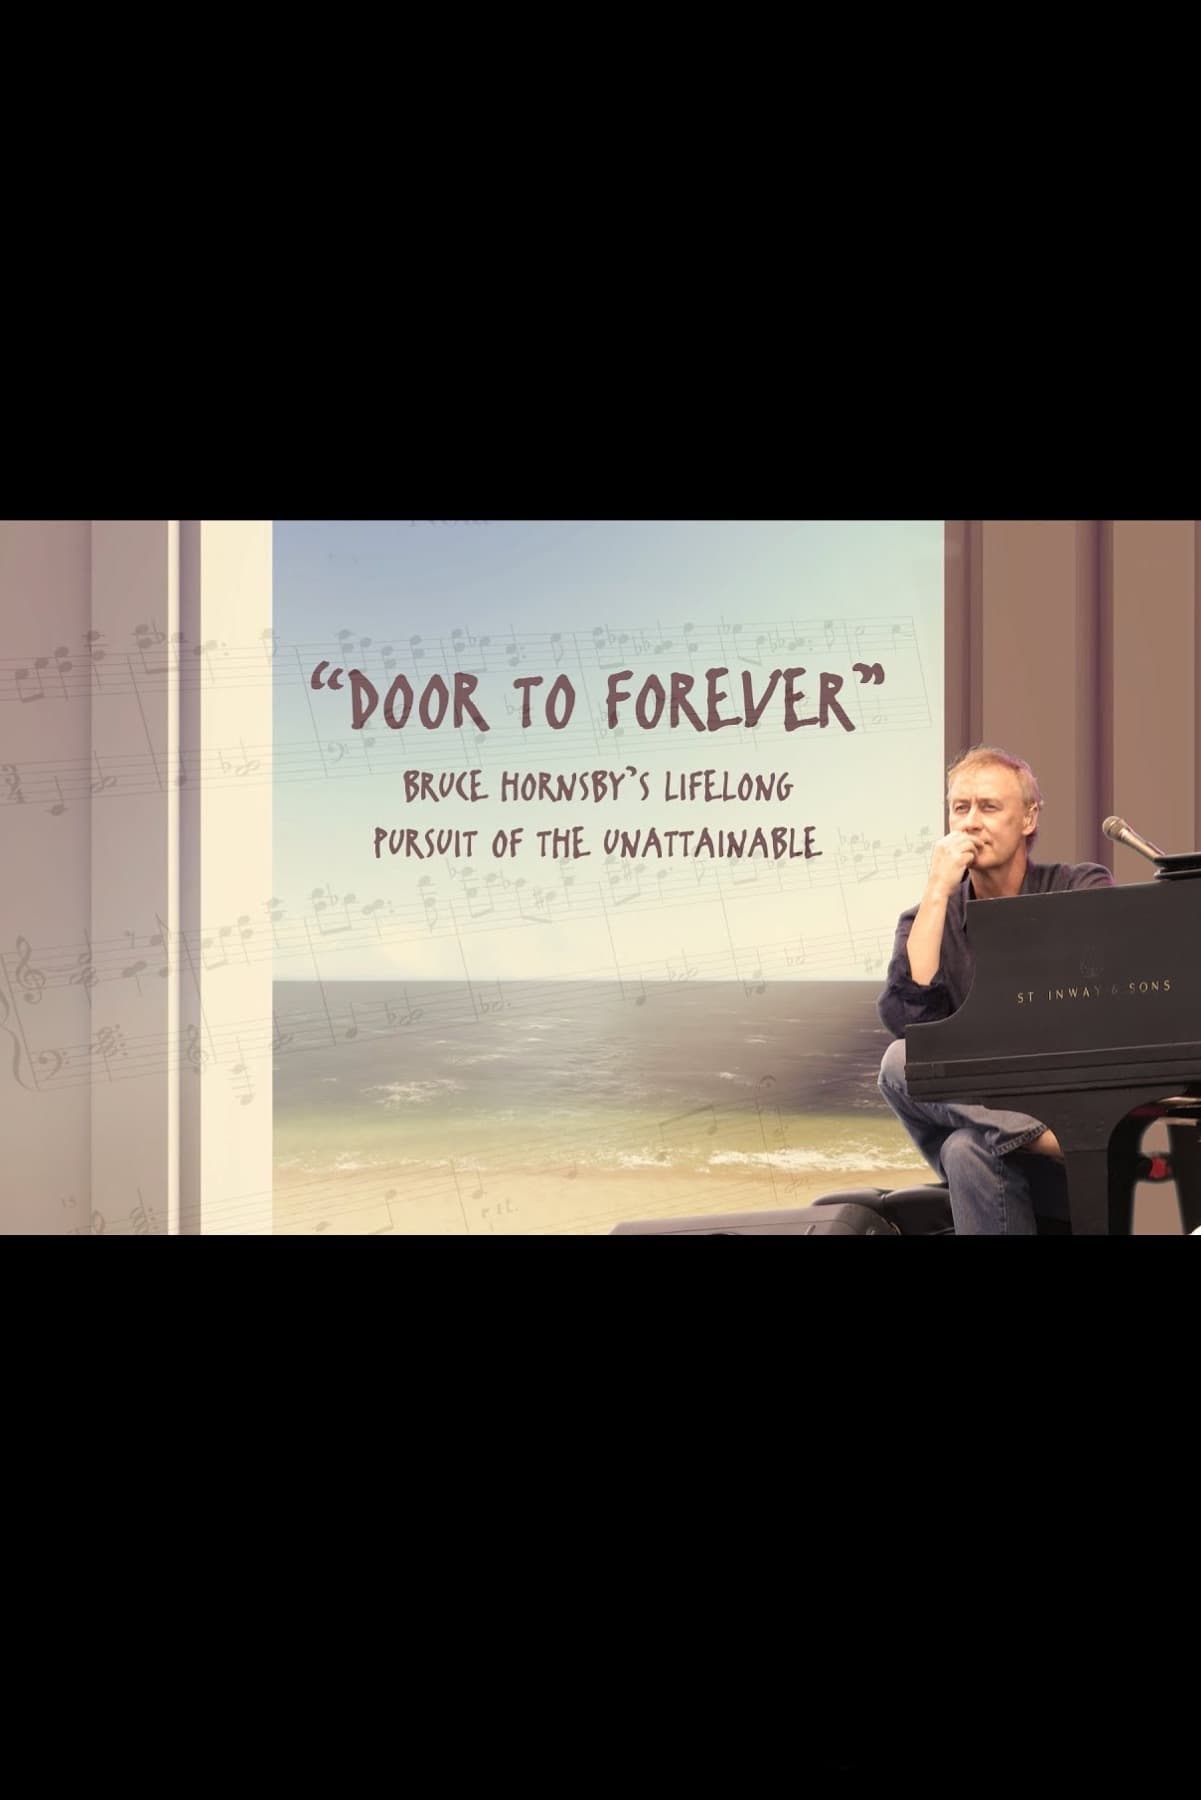 Door To Forever: Bruce Hornsby's Lifelong Pursuit of the Unattainable